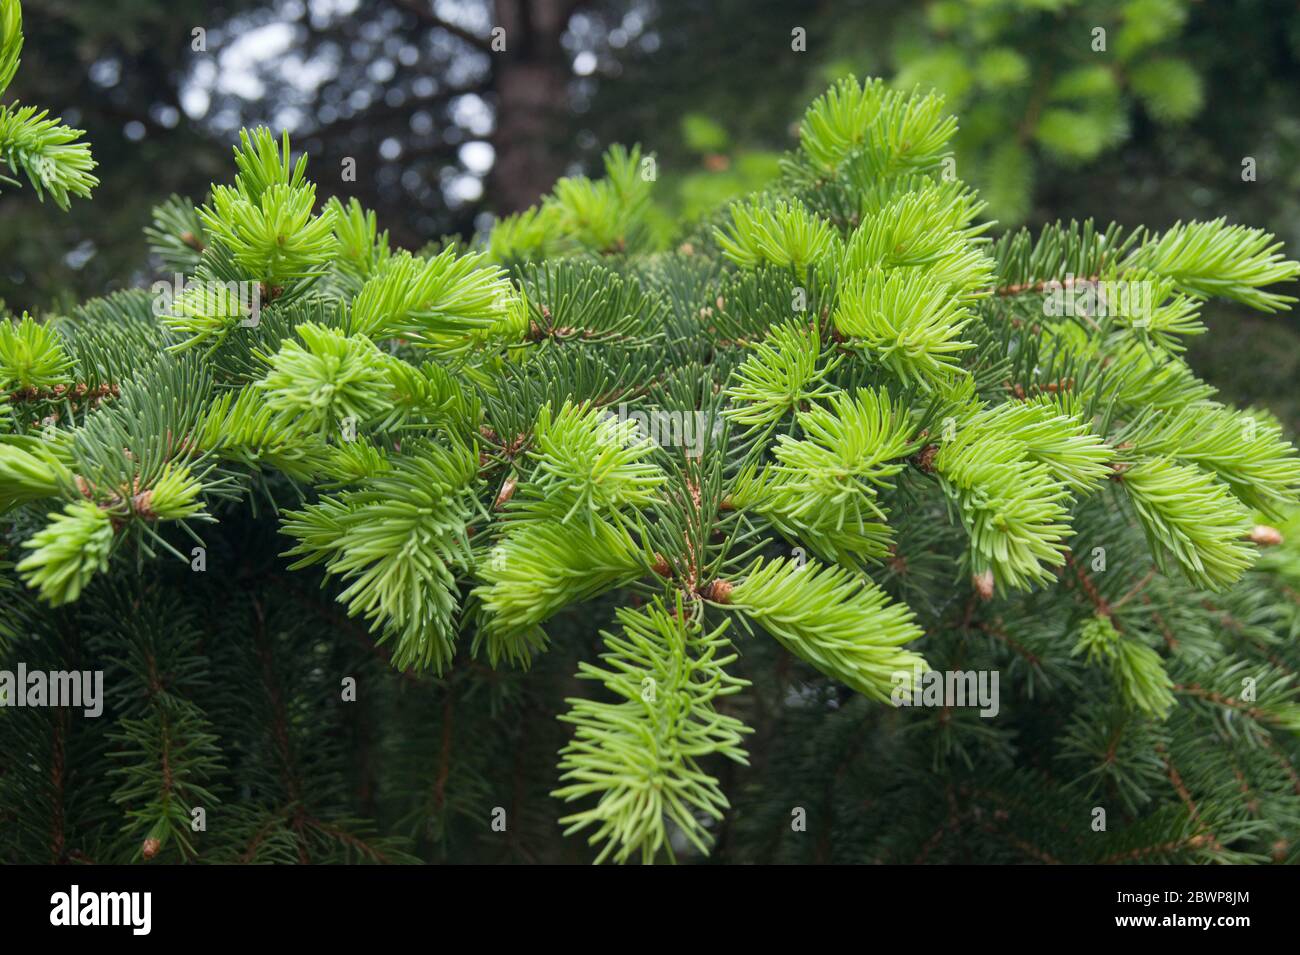 Picea abies European or Norway spruce Stock Photo